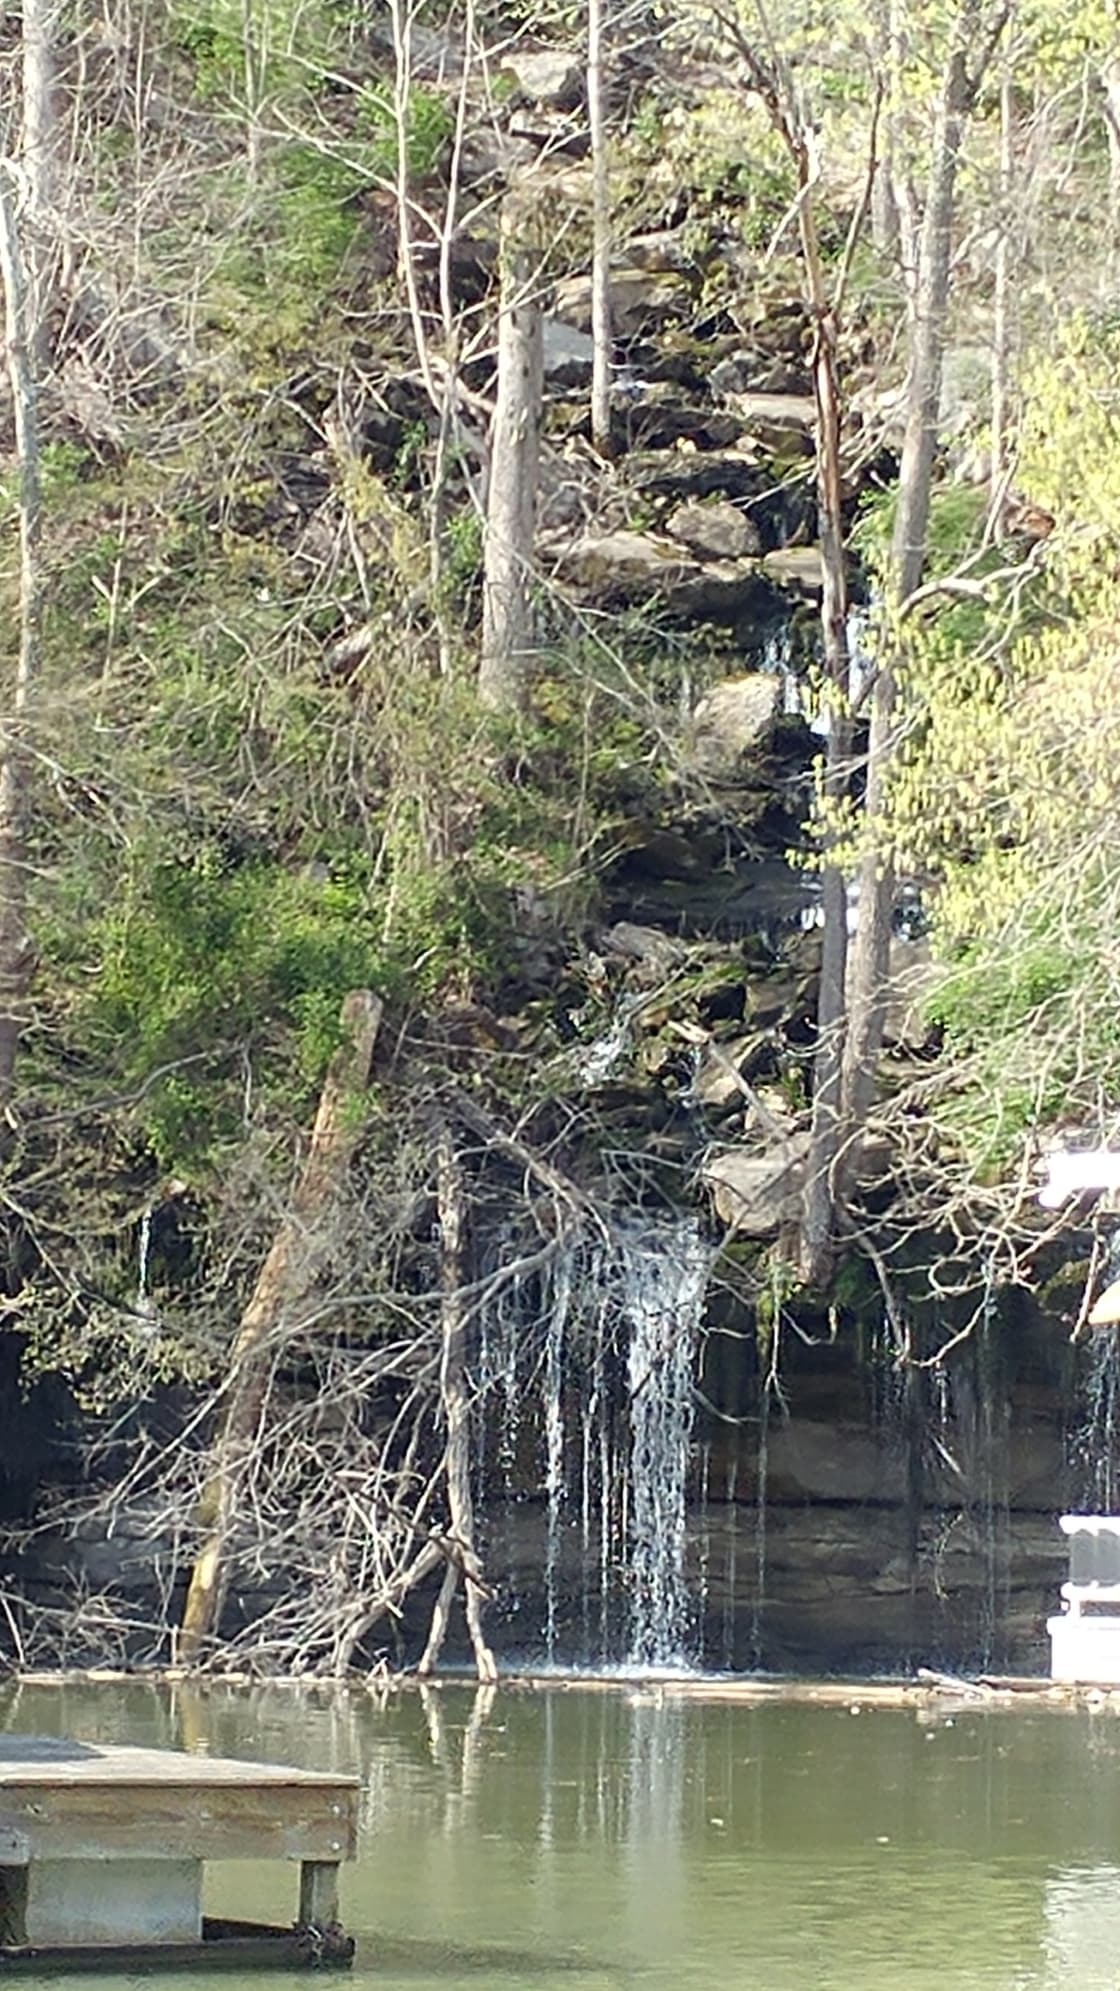 Waterfalls in the area. If you take one of the boats out you will see several waterfalls along the creek.